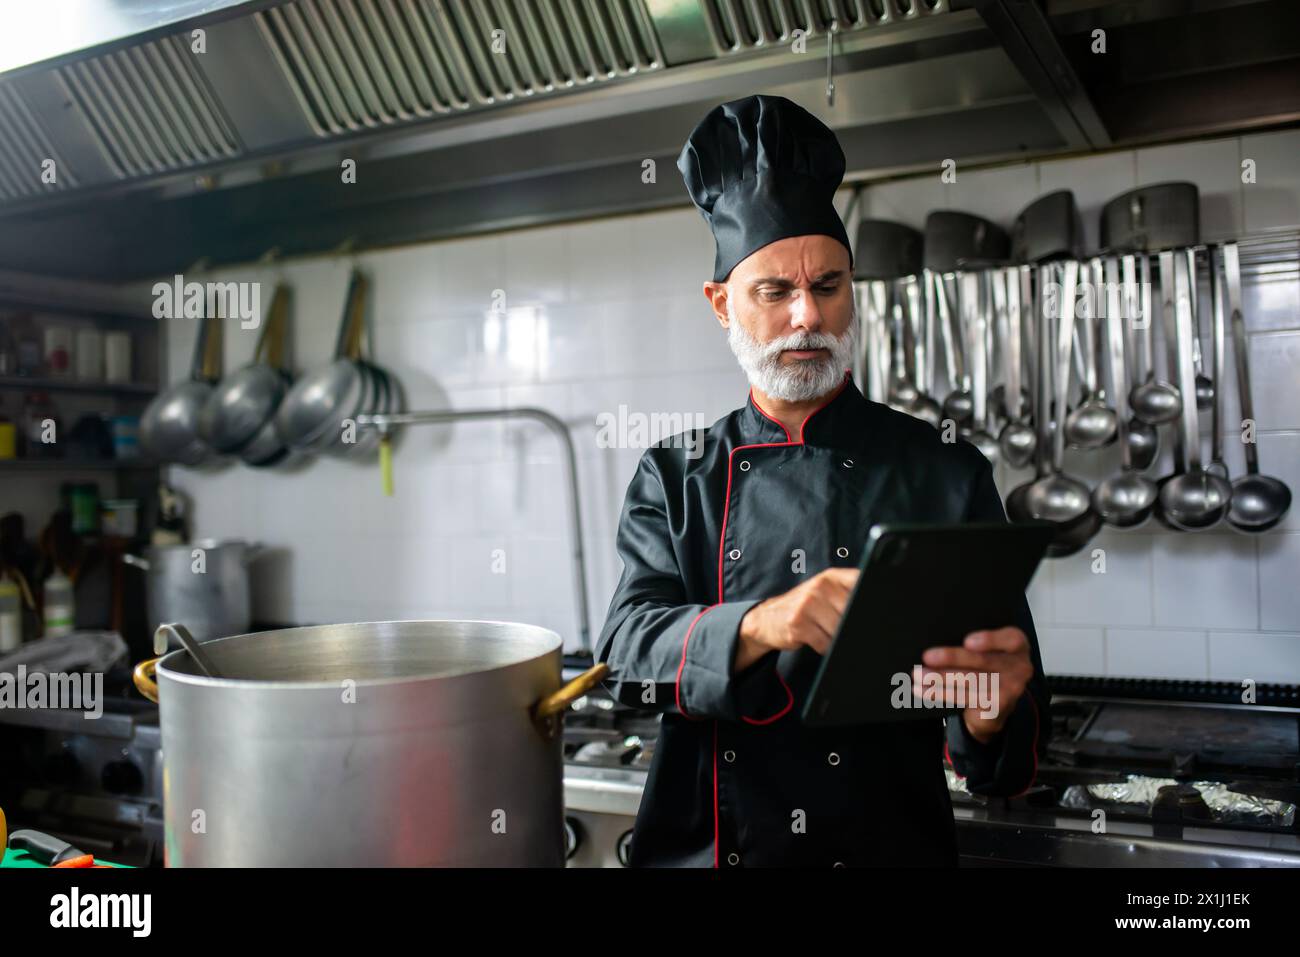 Seasoned male chef in uniform reads a digital recipe on a tablet while cooking Stock Photo